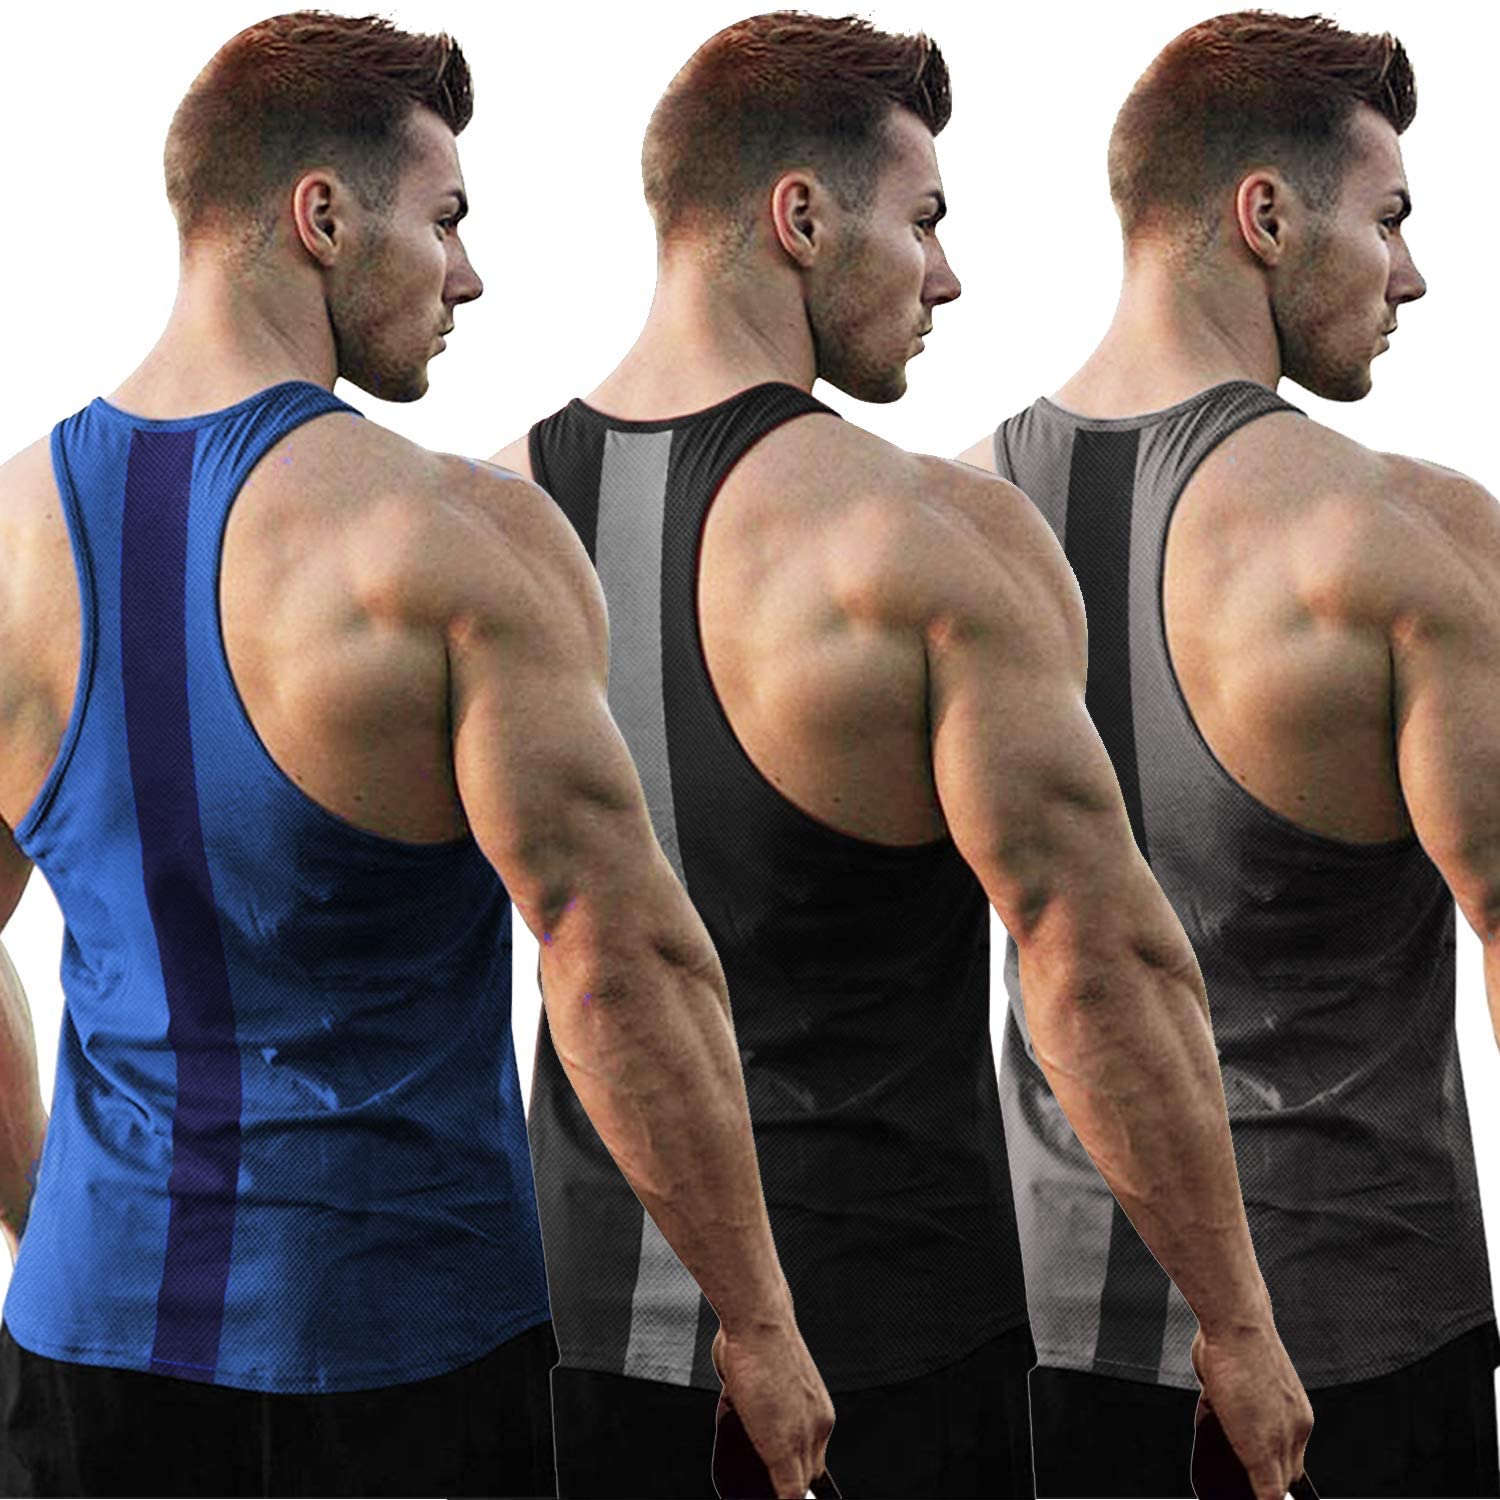 COOFANDY Men's Bodybuilding Gym Tank Tops Pack of 3 Stringer Workout T-Shirts Sleeveless 